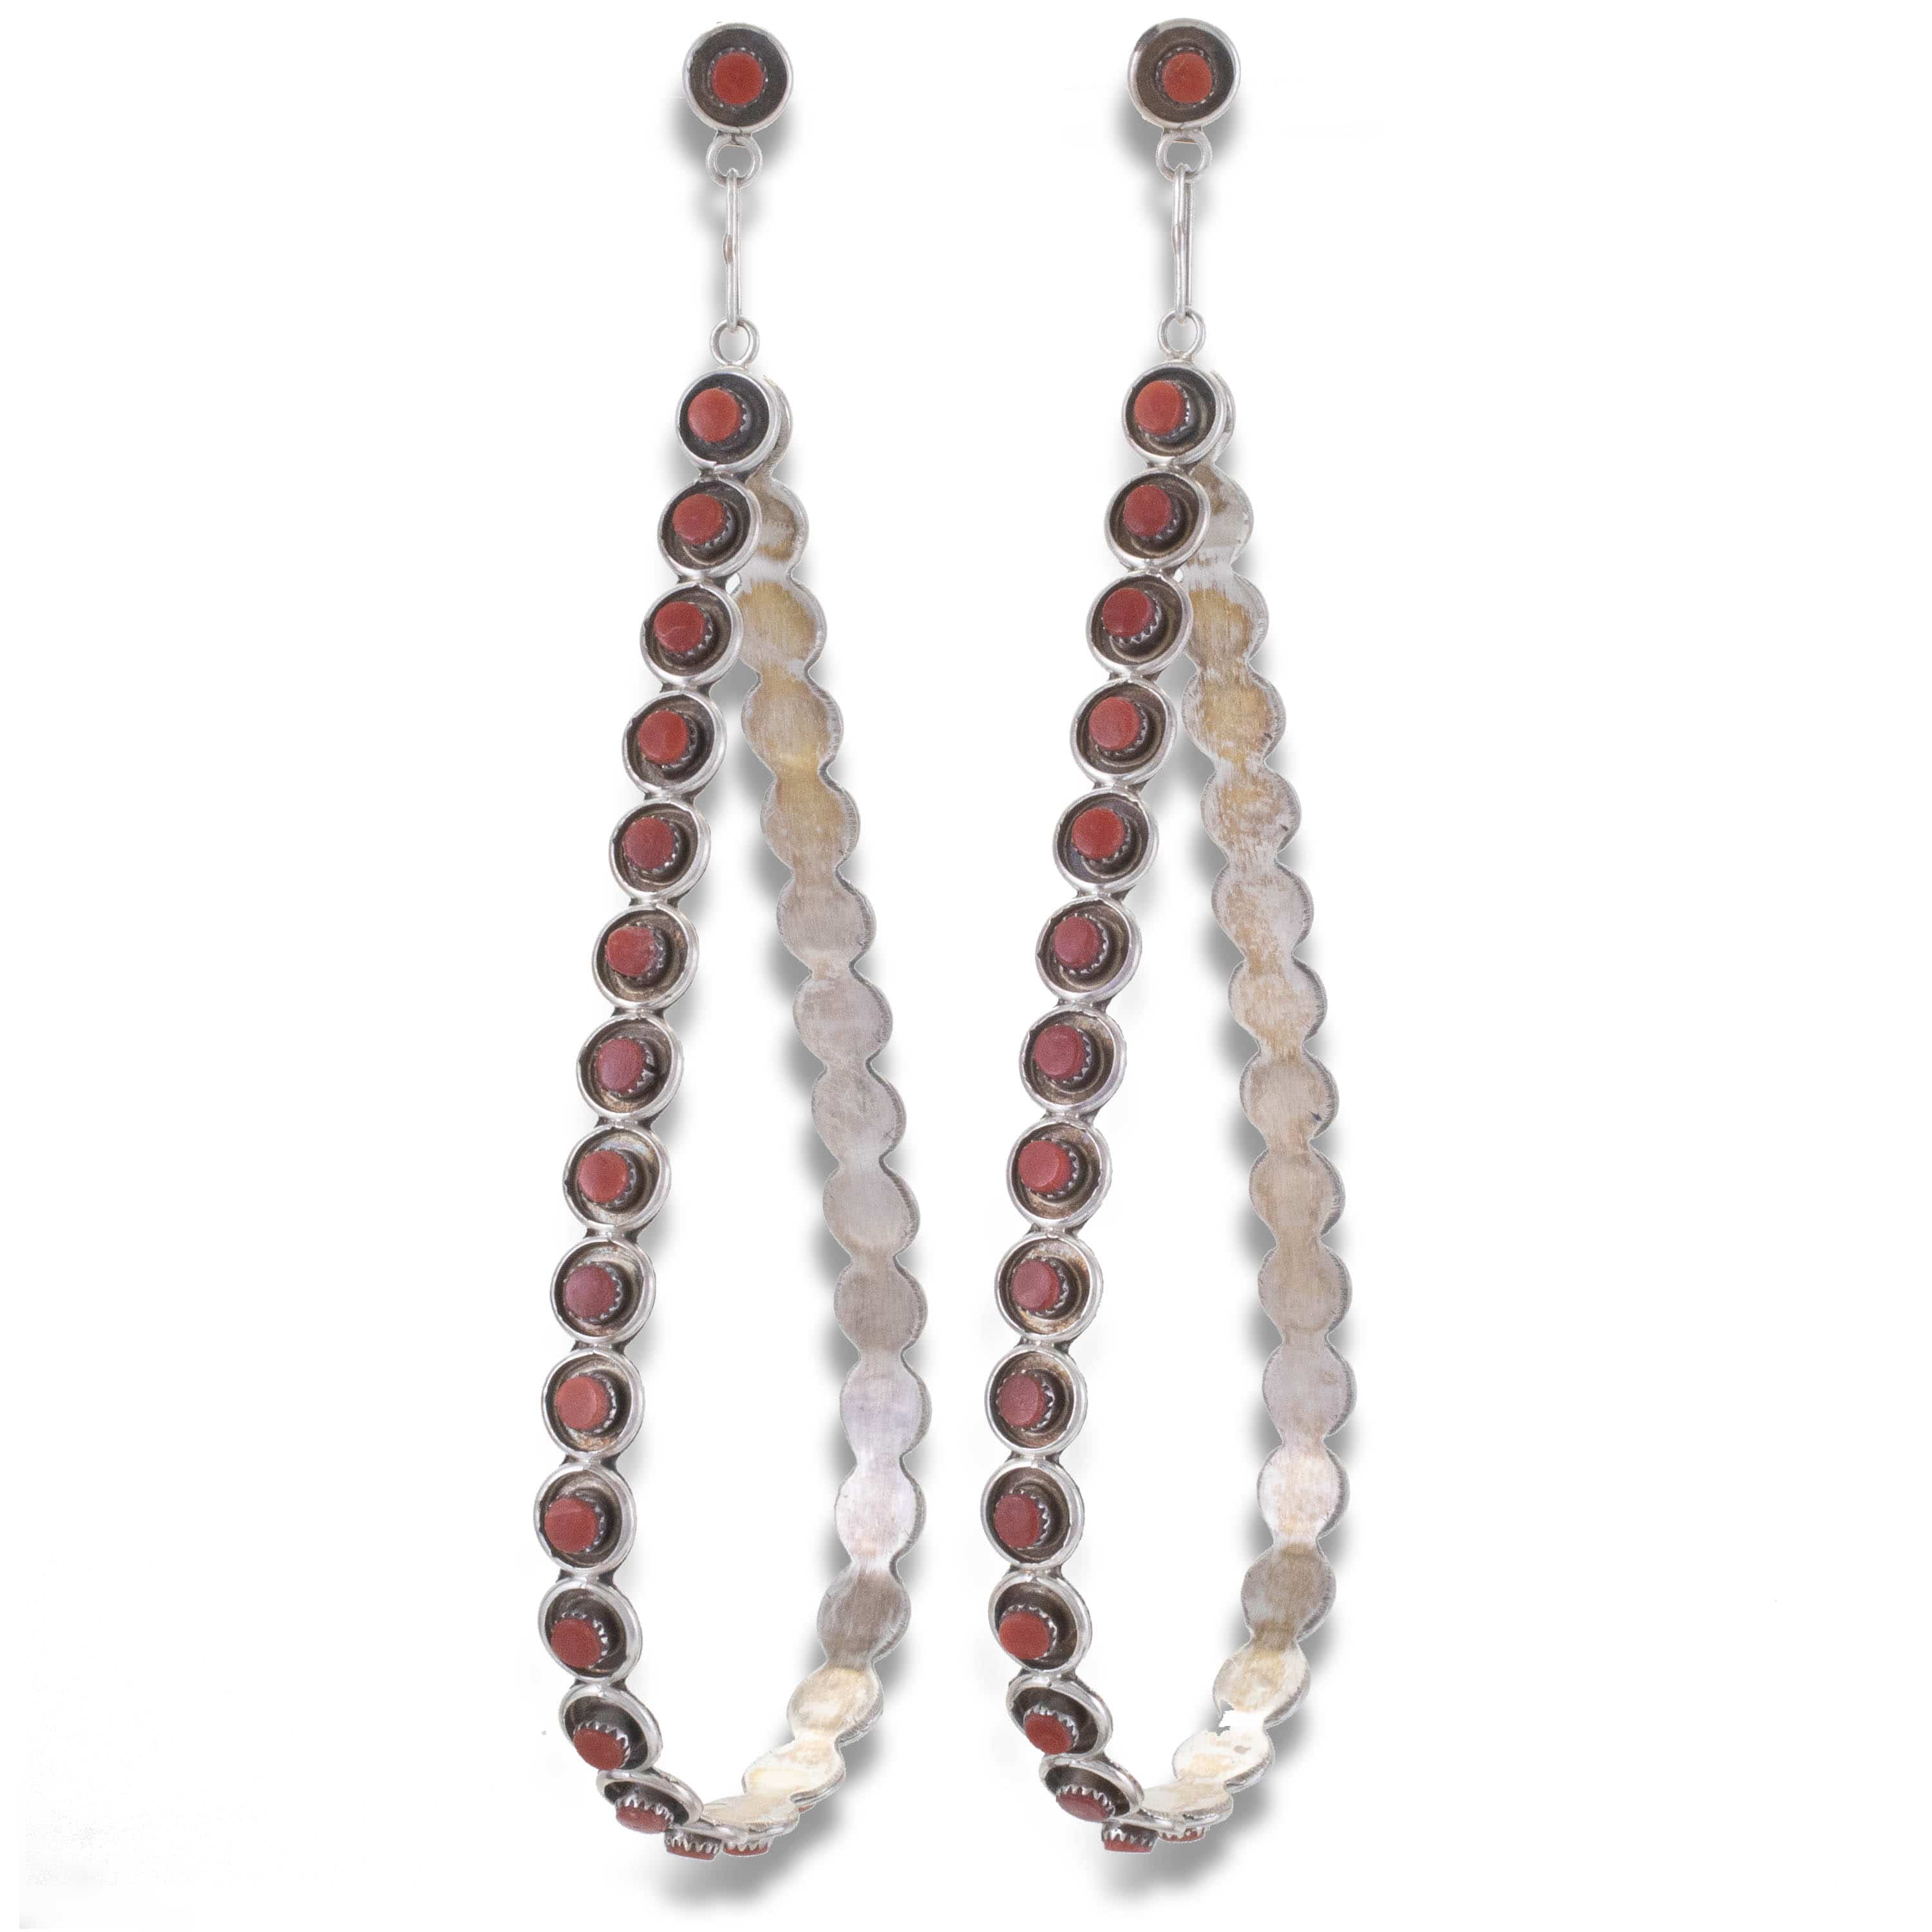 Kalifano Native American Jewelry Coral Zuni Petit Point Teardrop USA Native American Made 925 Sterling Silver Dangly Earrings NAE1500.003